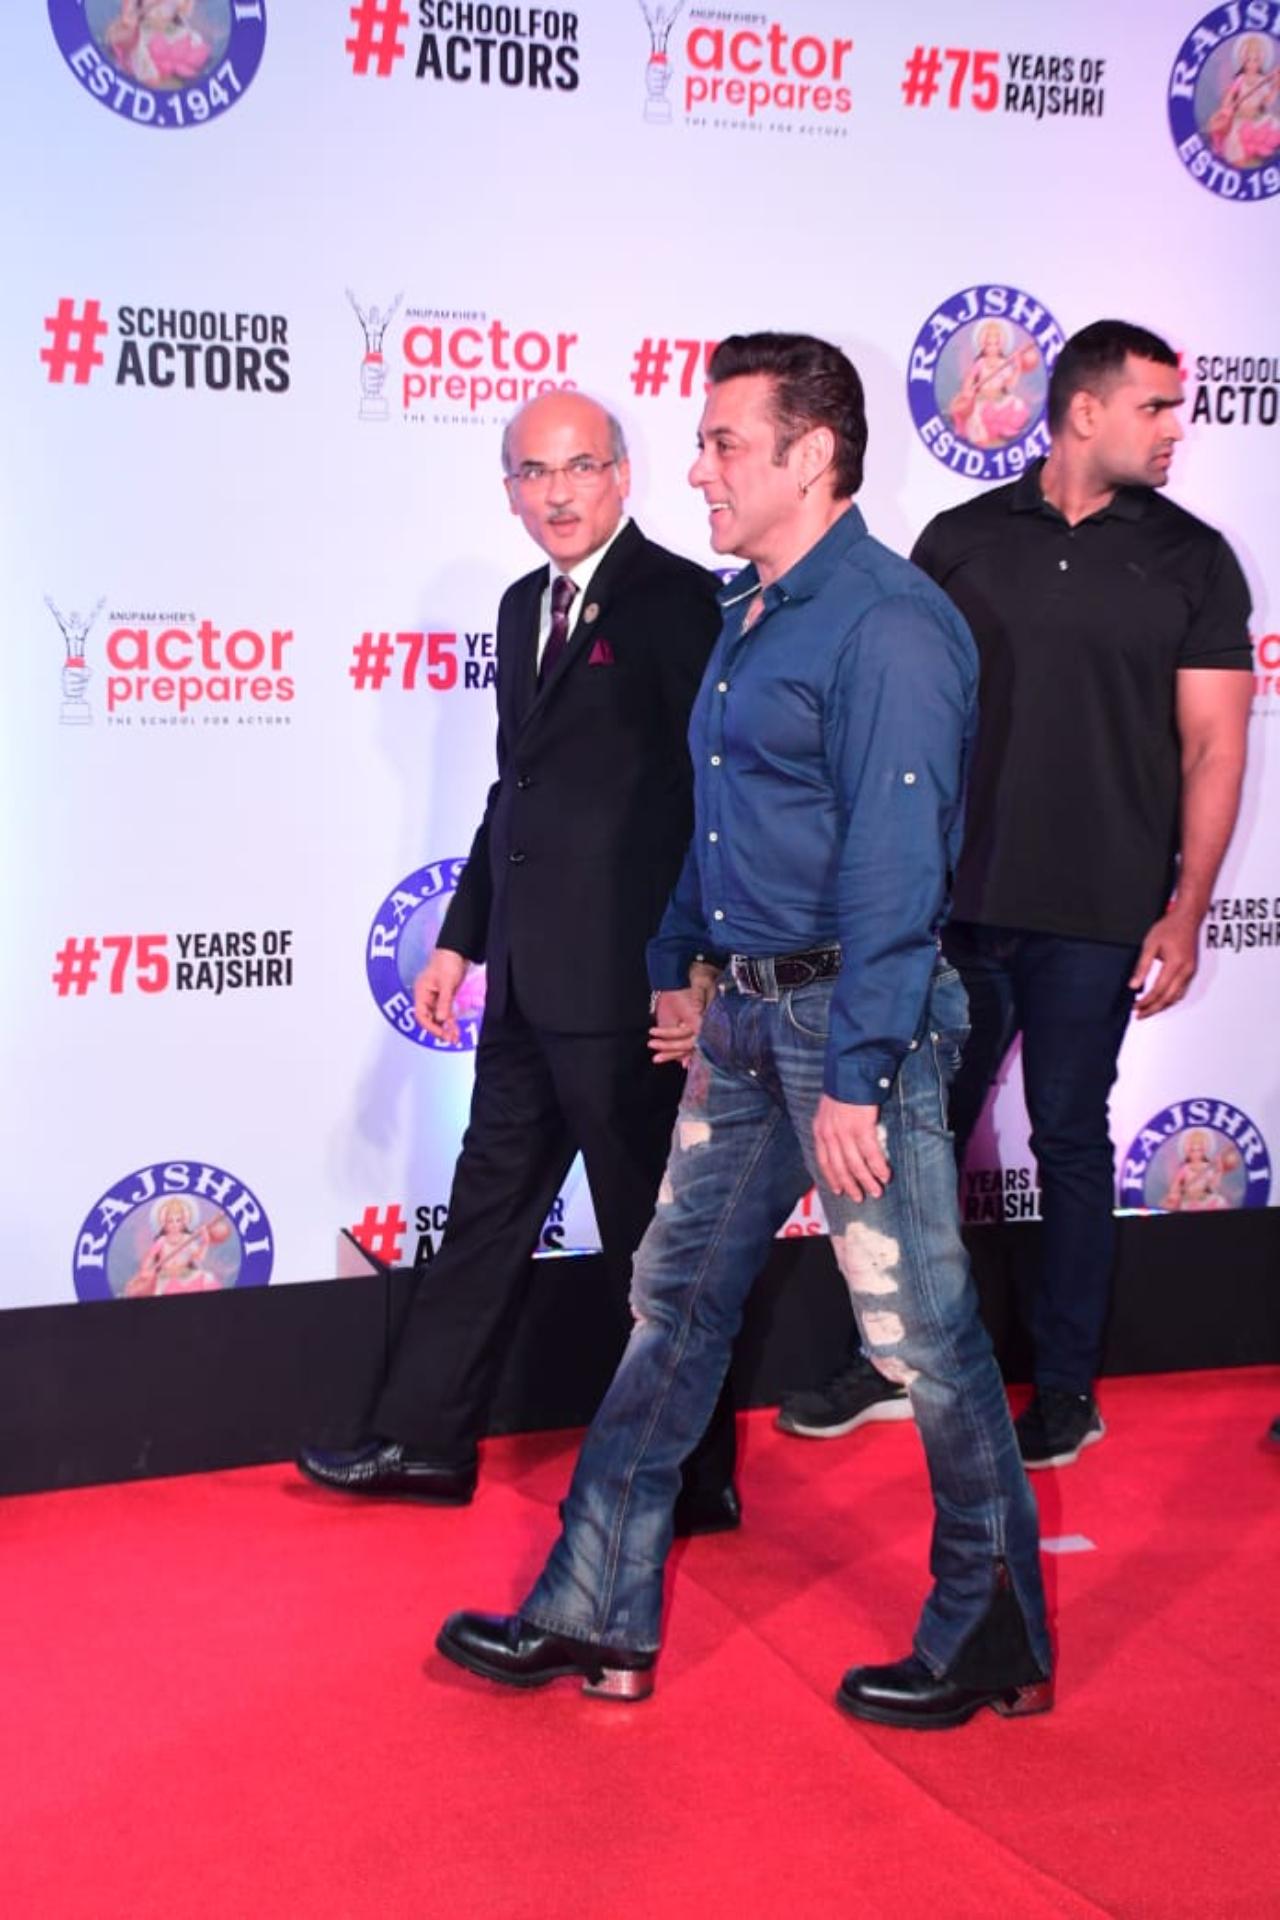 Salman Khan walked hand-in-hand with ace filmmaker Sooraj Barjatya on the red carpet of the premiere of Uunchai. The film which was released on November 11 is the latest directorial by Barjatya. The film stars Amitabh Bachchan, Parineeti Chopra, Neena Gupta, Boman Irani, and Anupam Kher